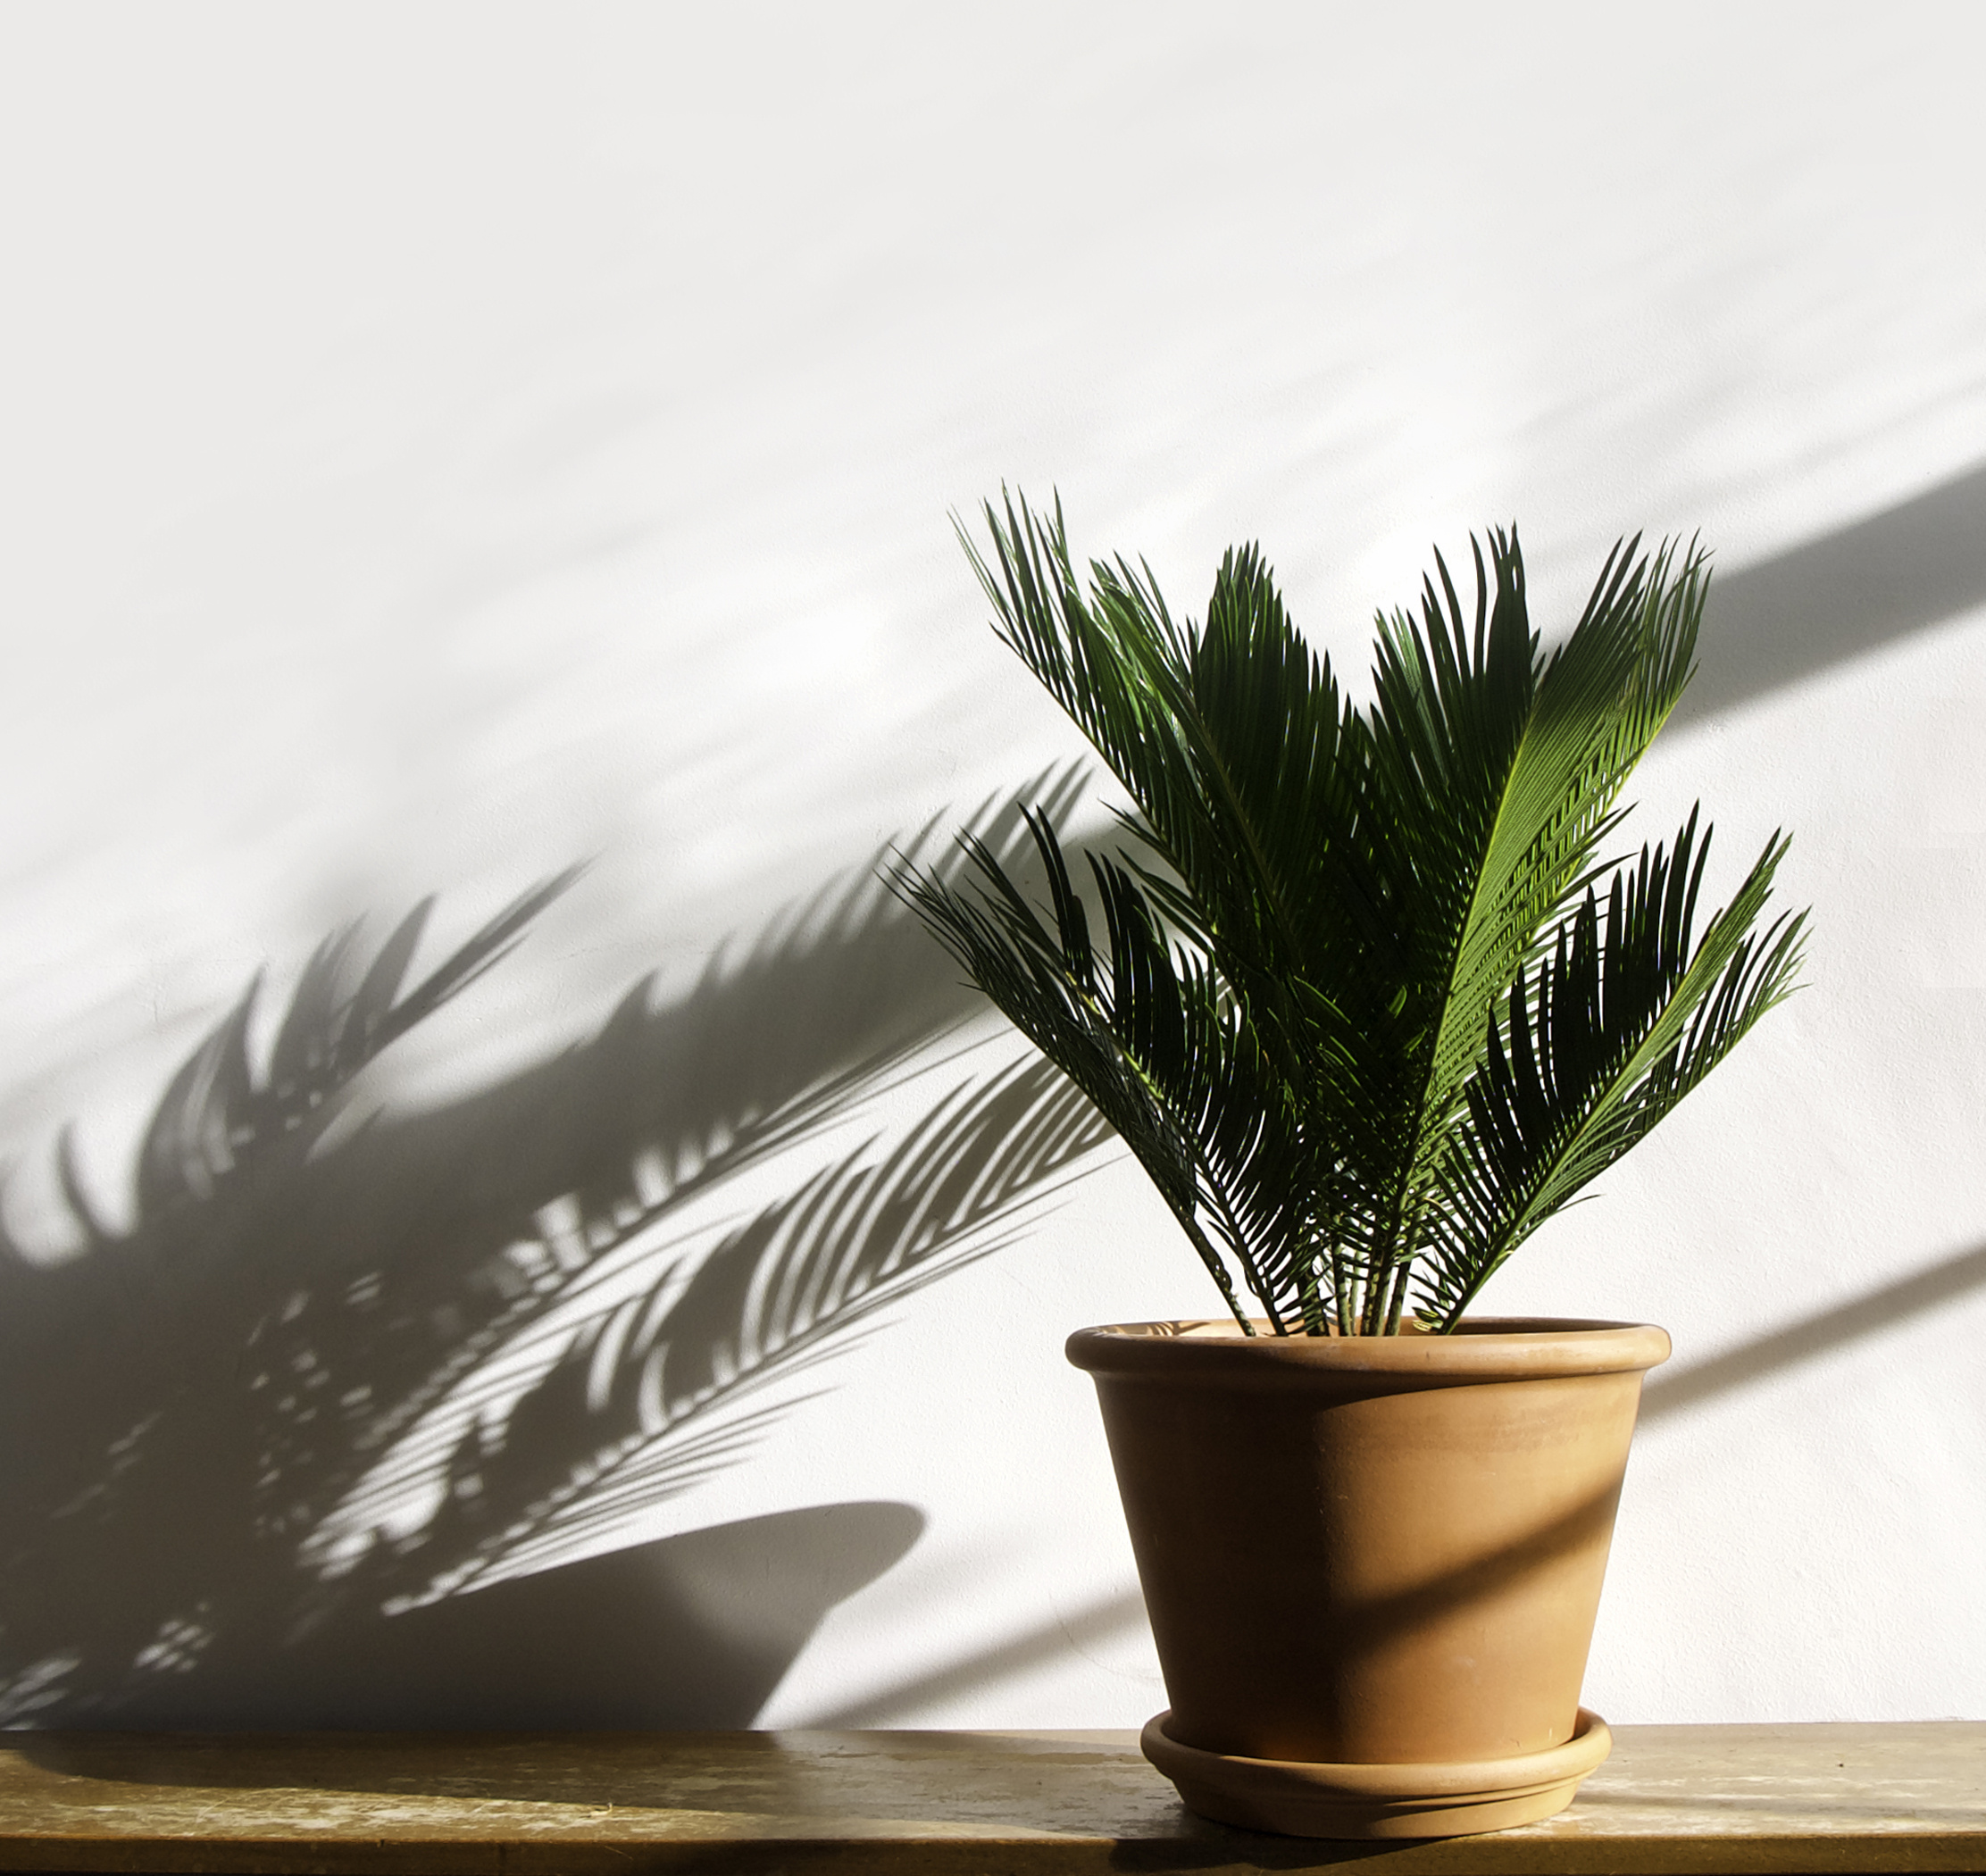 The best way to repot your Sago Palm